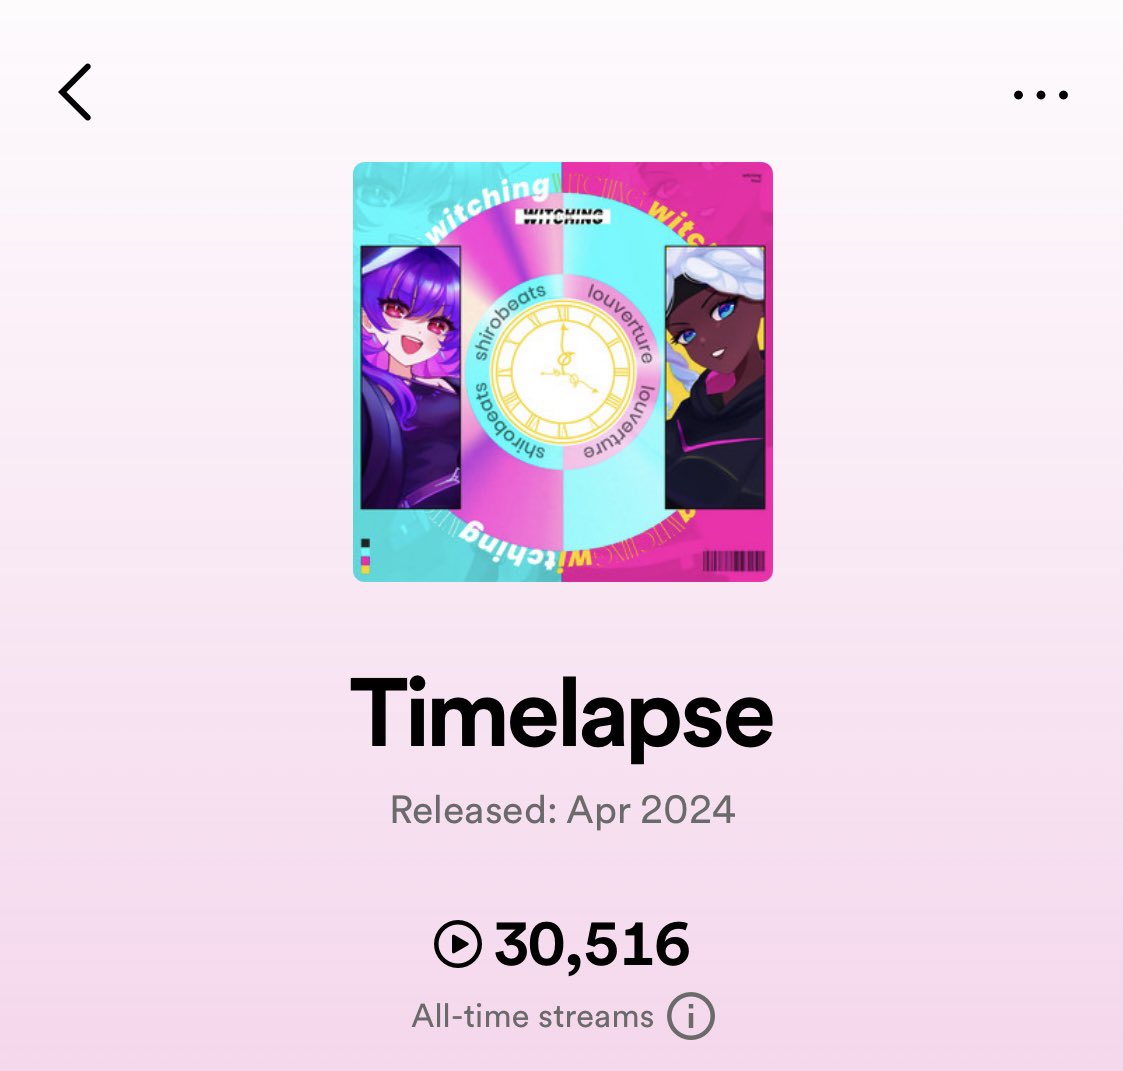 Witching Hour has officially passed 300k streams… not only that but both CONQUEST & Timelapse have hit 30k streams! Can’t thank you guys enough for all the support on this album 🙏🏾💕